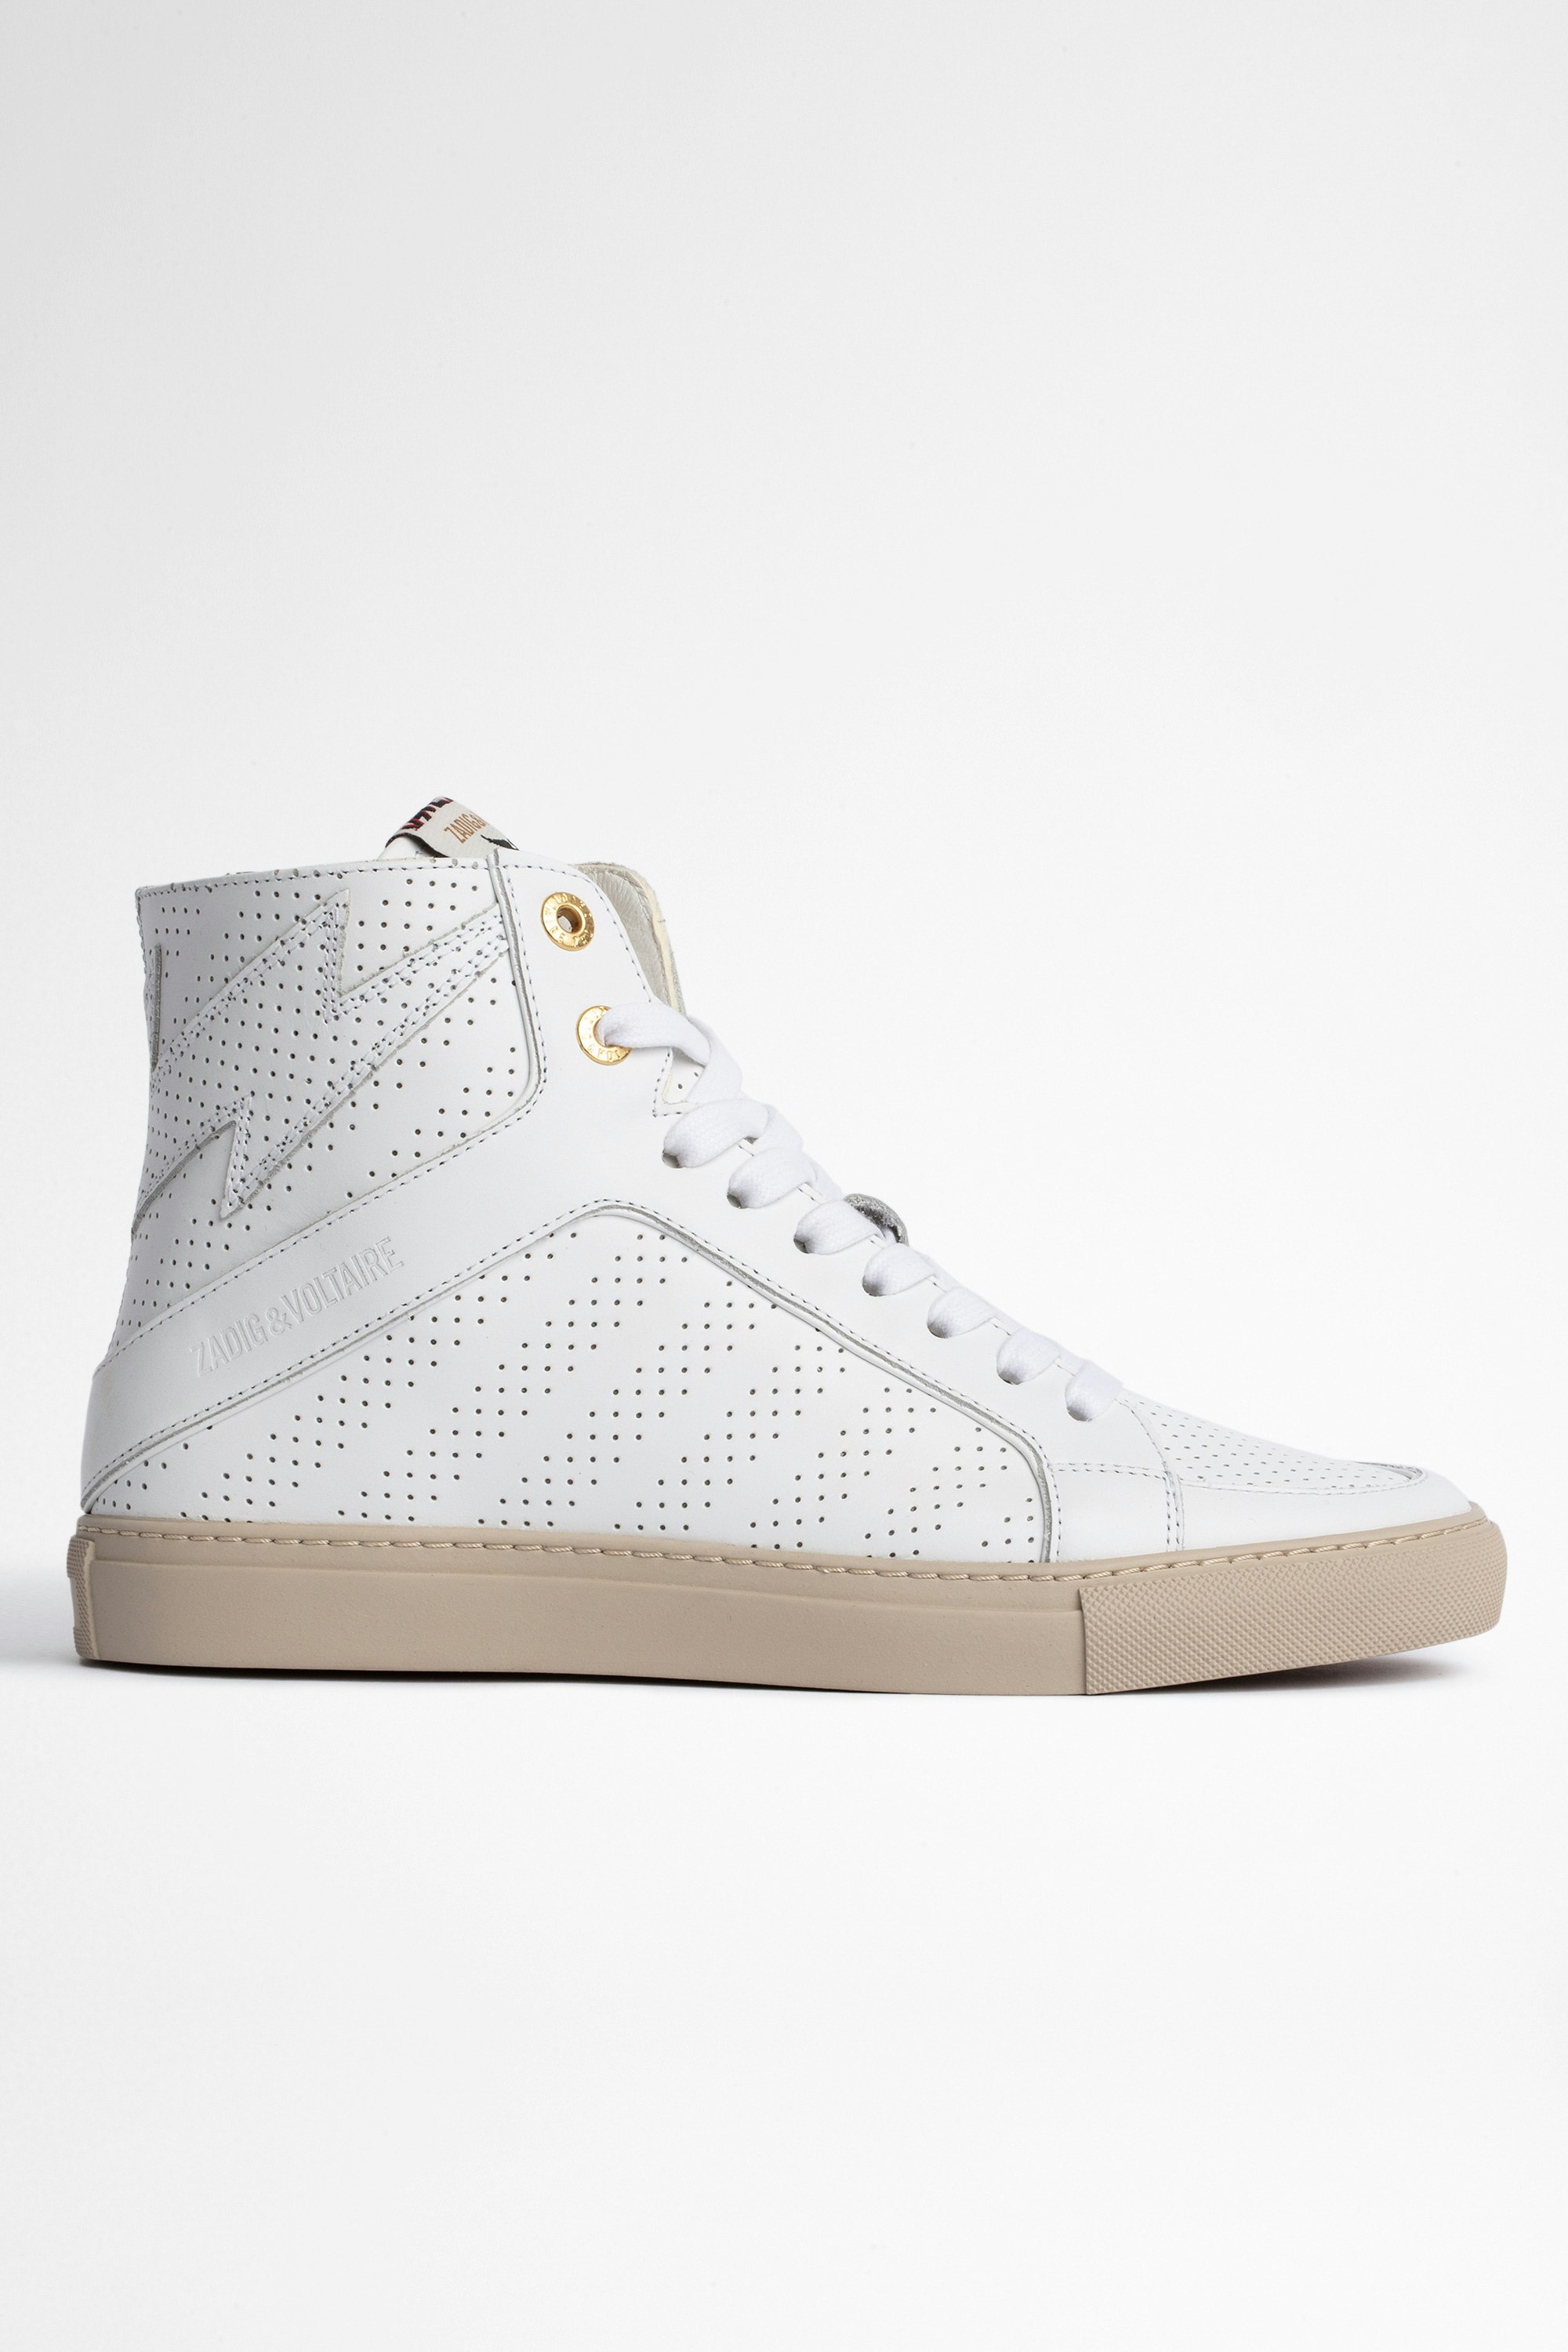 ZV1747 High Flash レザースニーカー Women's white perforated leather high-top sneakers